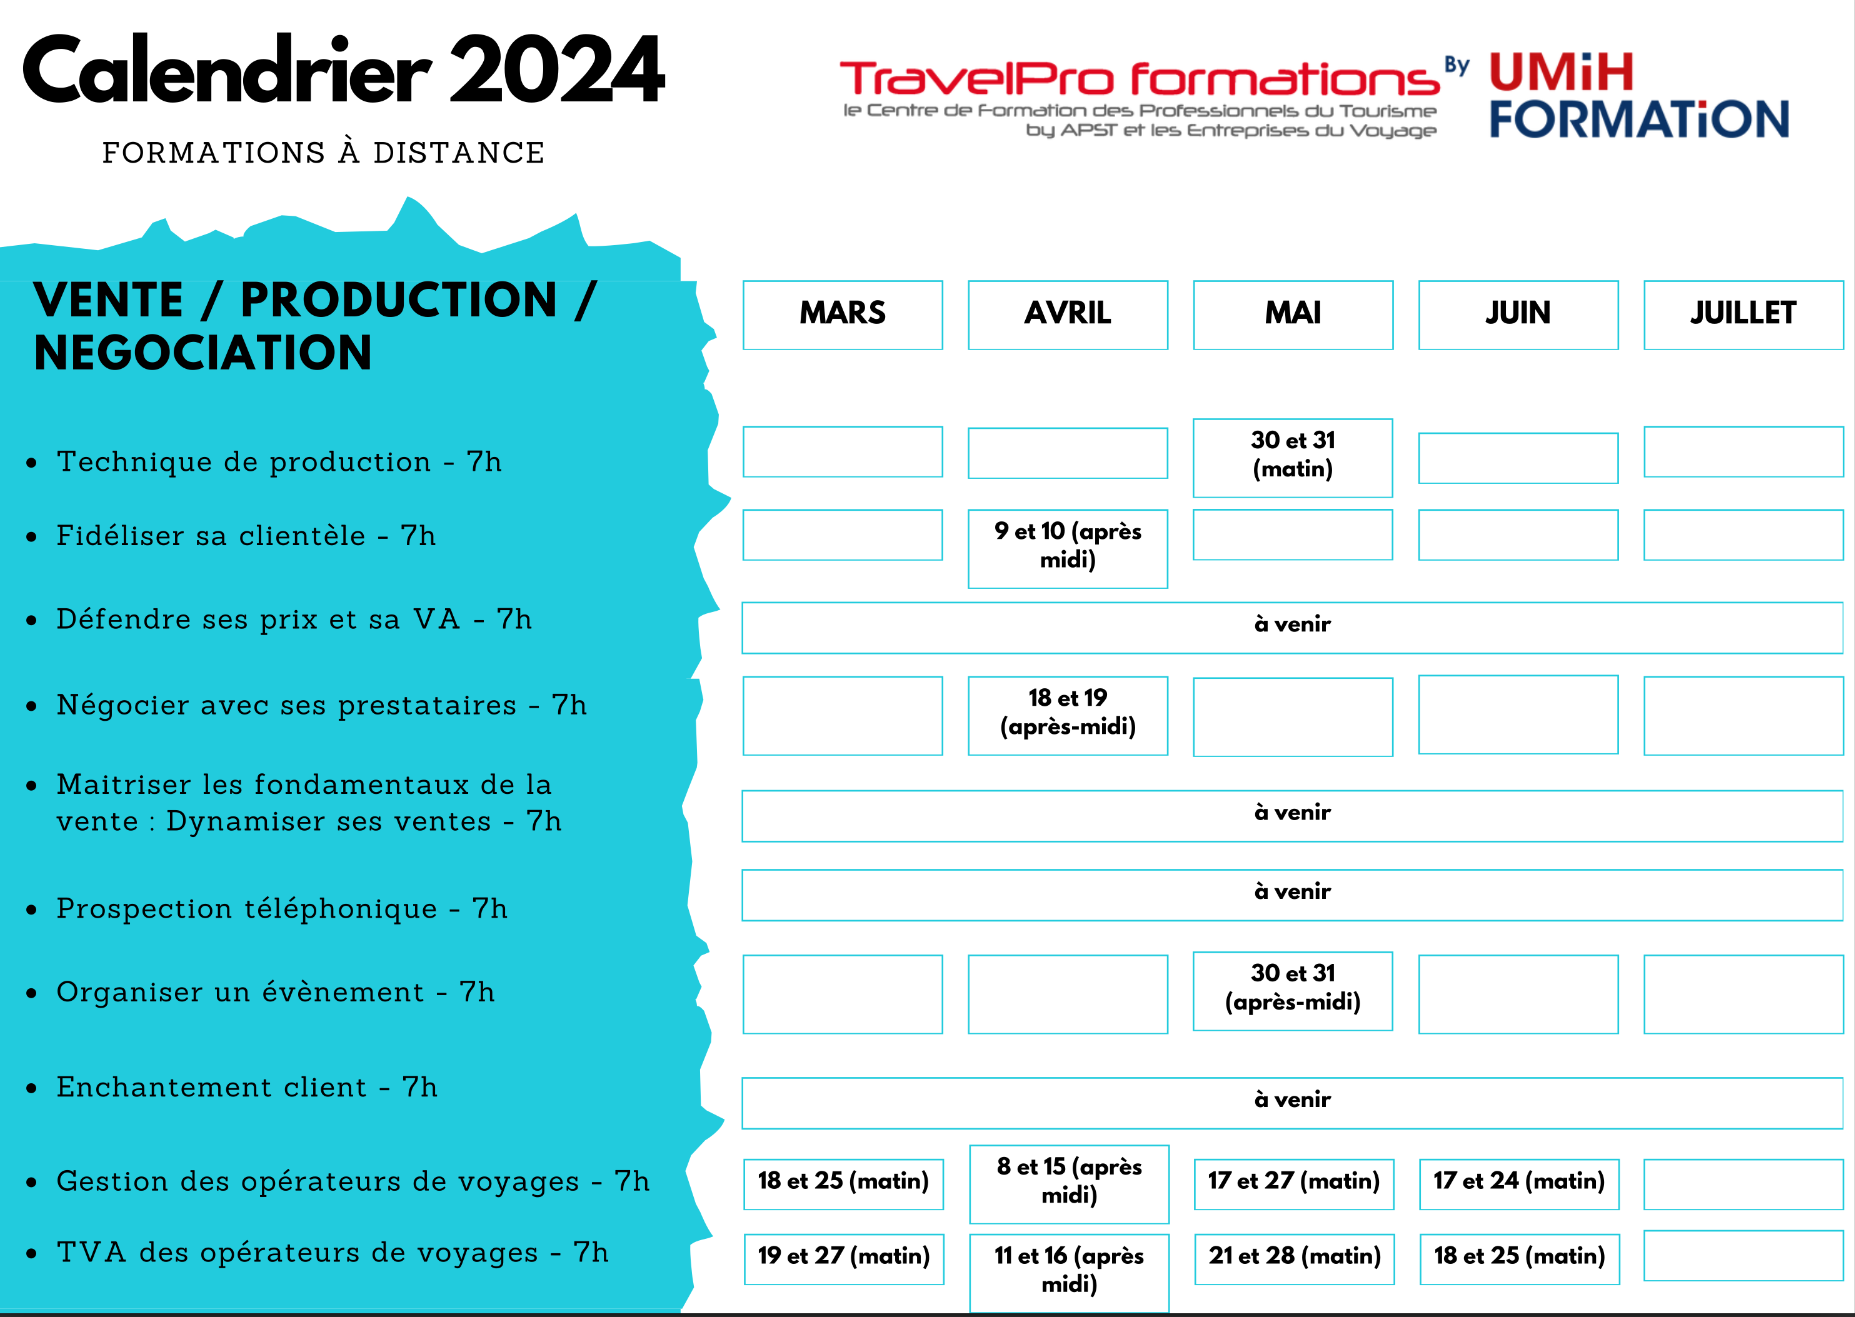 Calendrier des formations TravelPro Formations